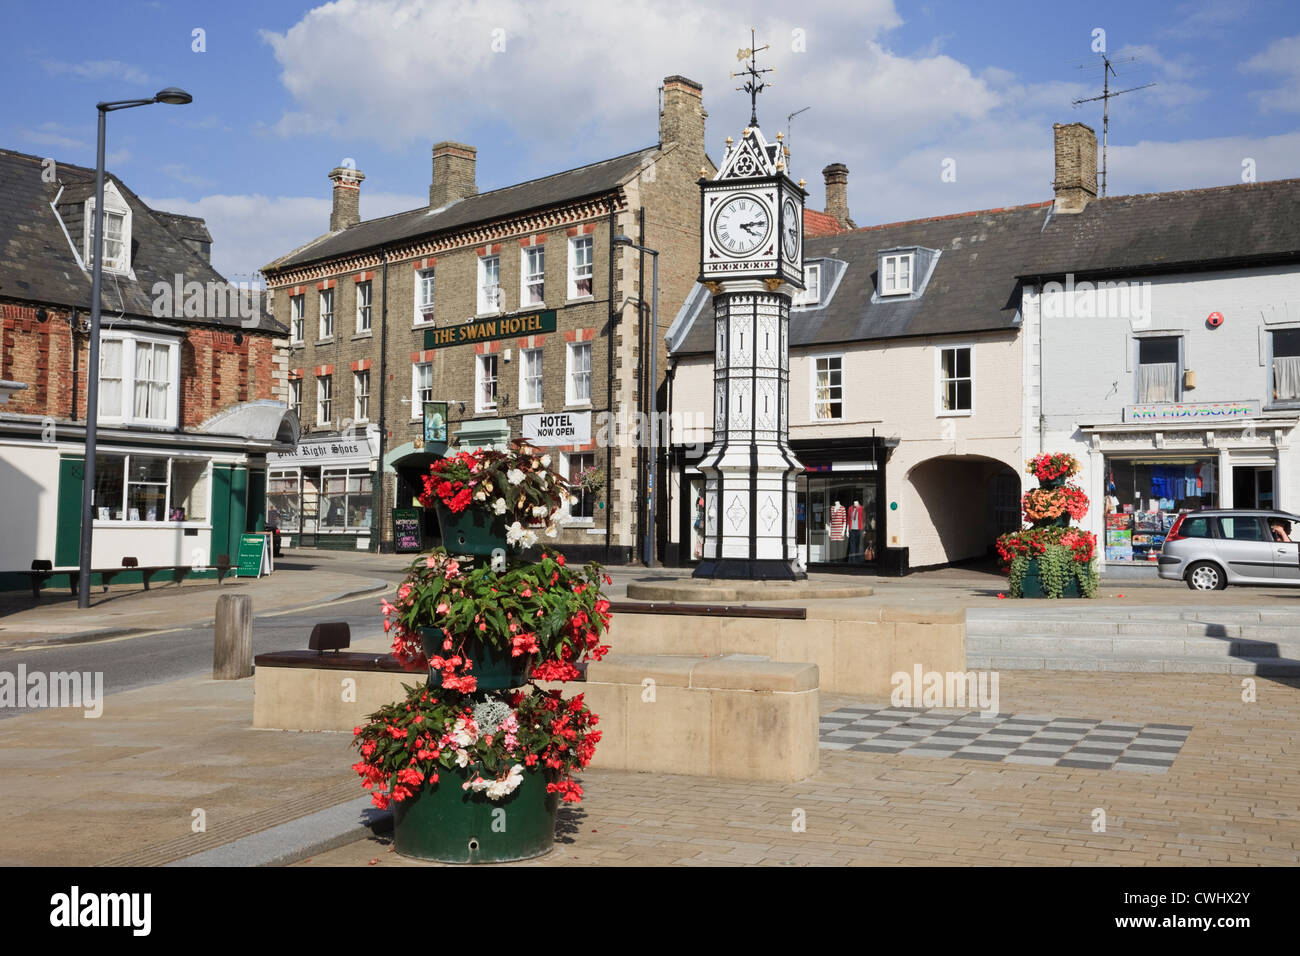 Shops around the paved town square with ornate old clock by James Scott by Swan hotel in Downham Market, Norfolk, England, UK Stock Photo